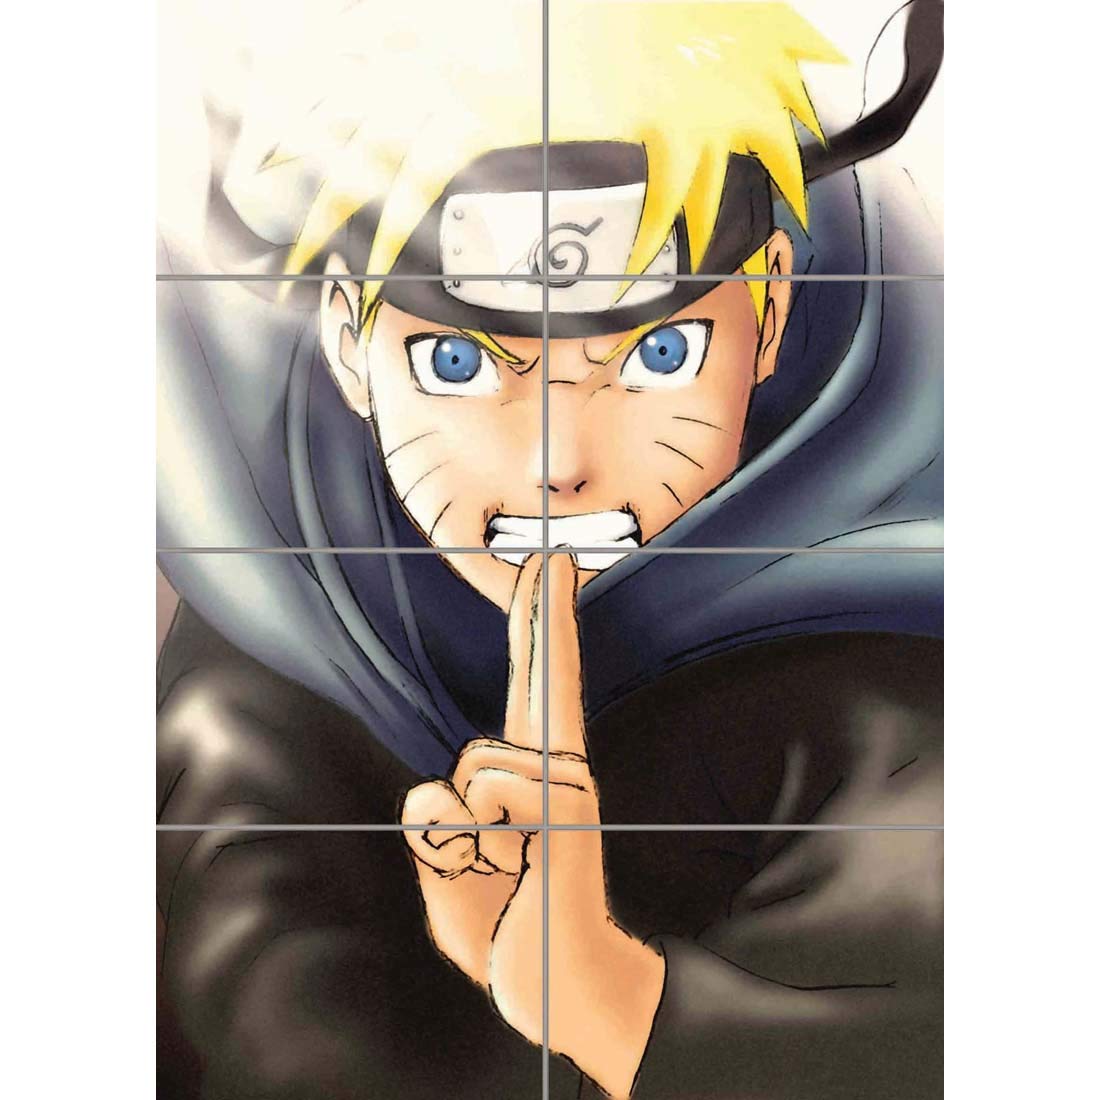 NARUTO SHIPPUDEN BY MMBJULIEN GIANT WALL ART NEW POSTER